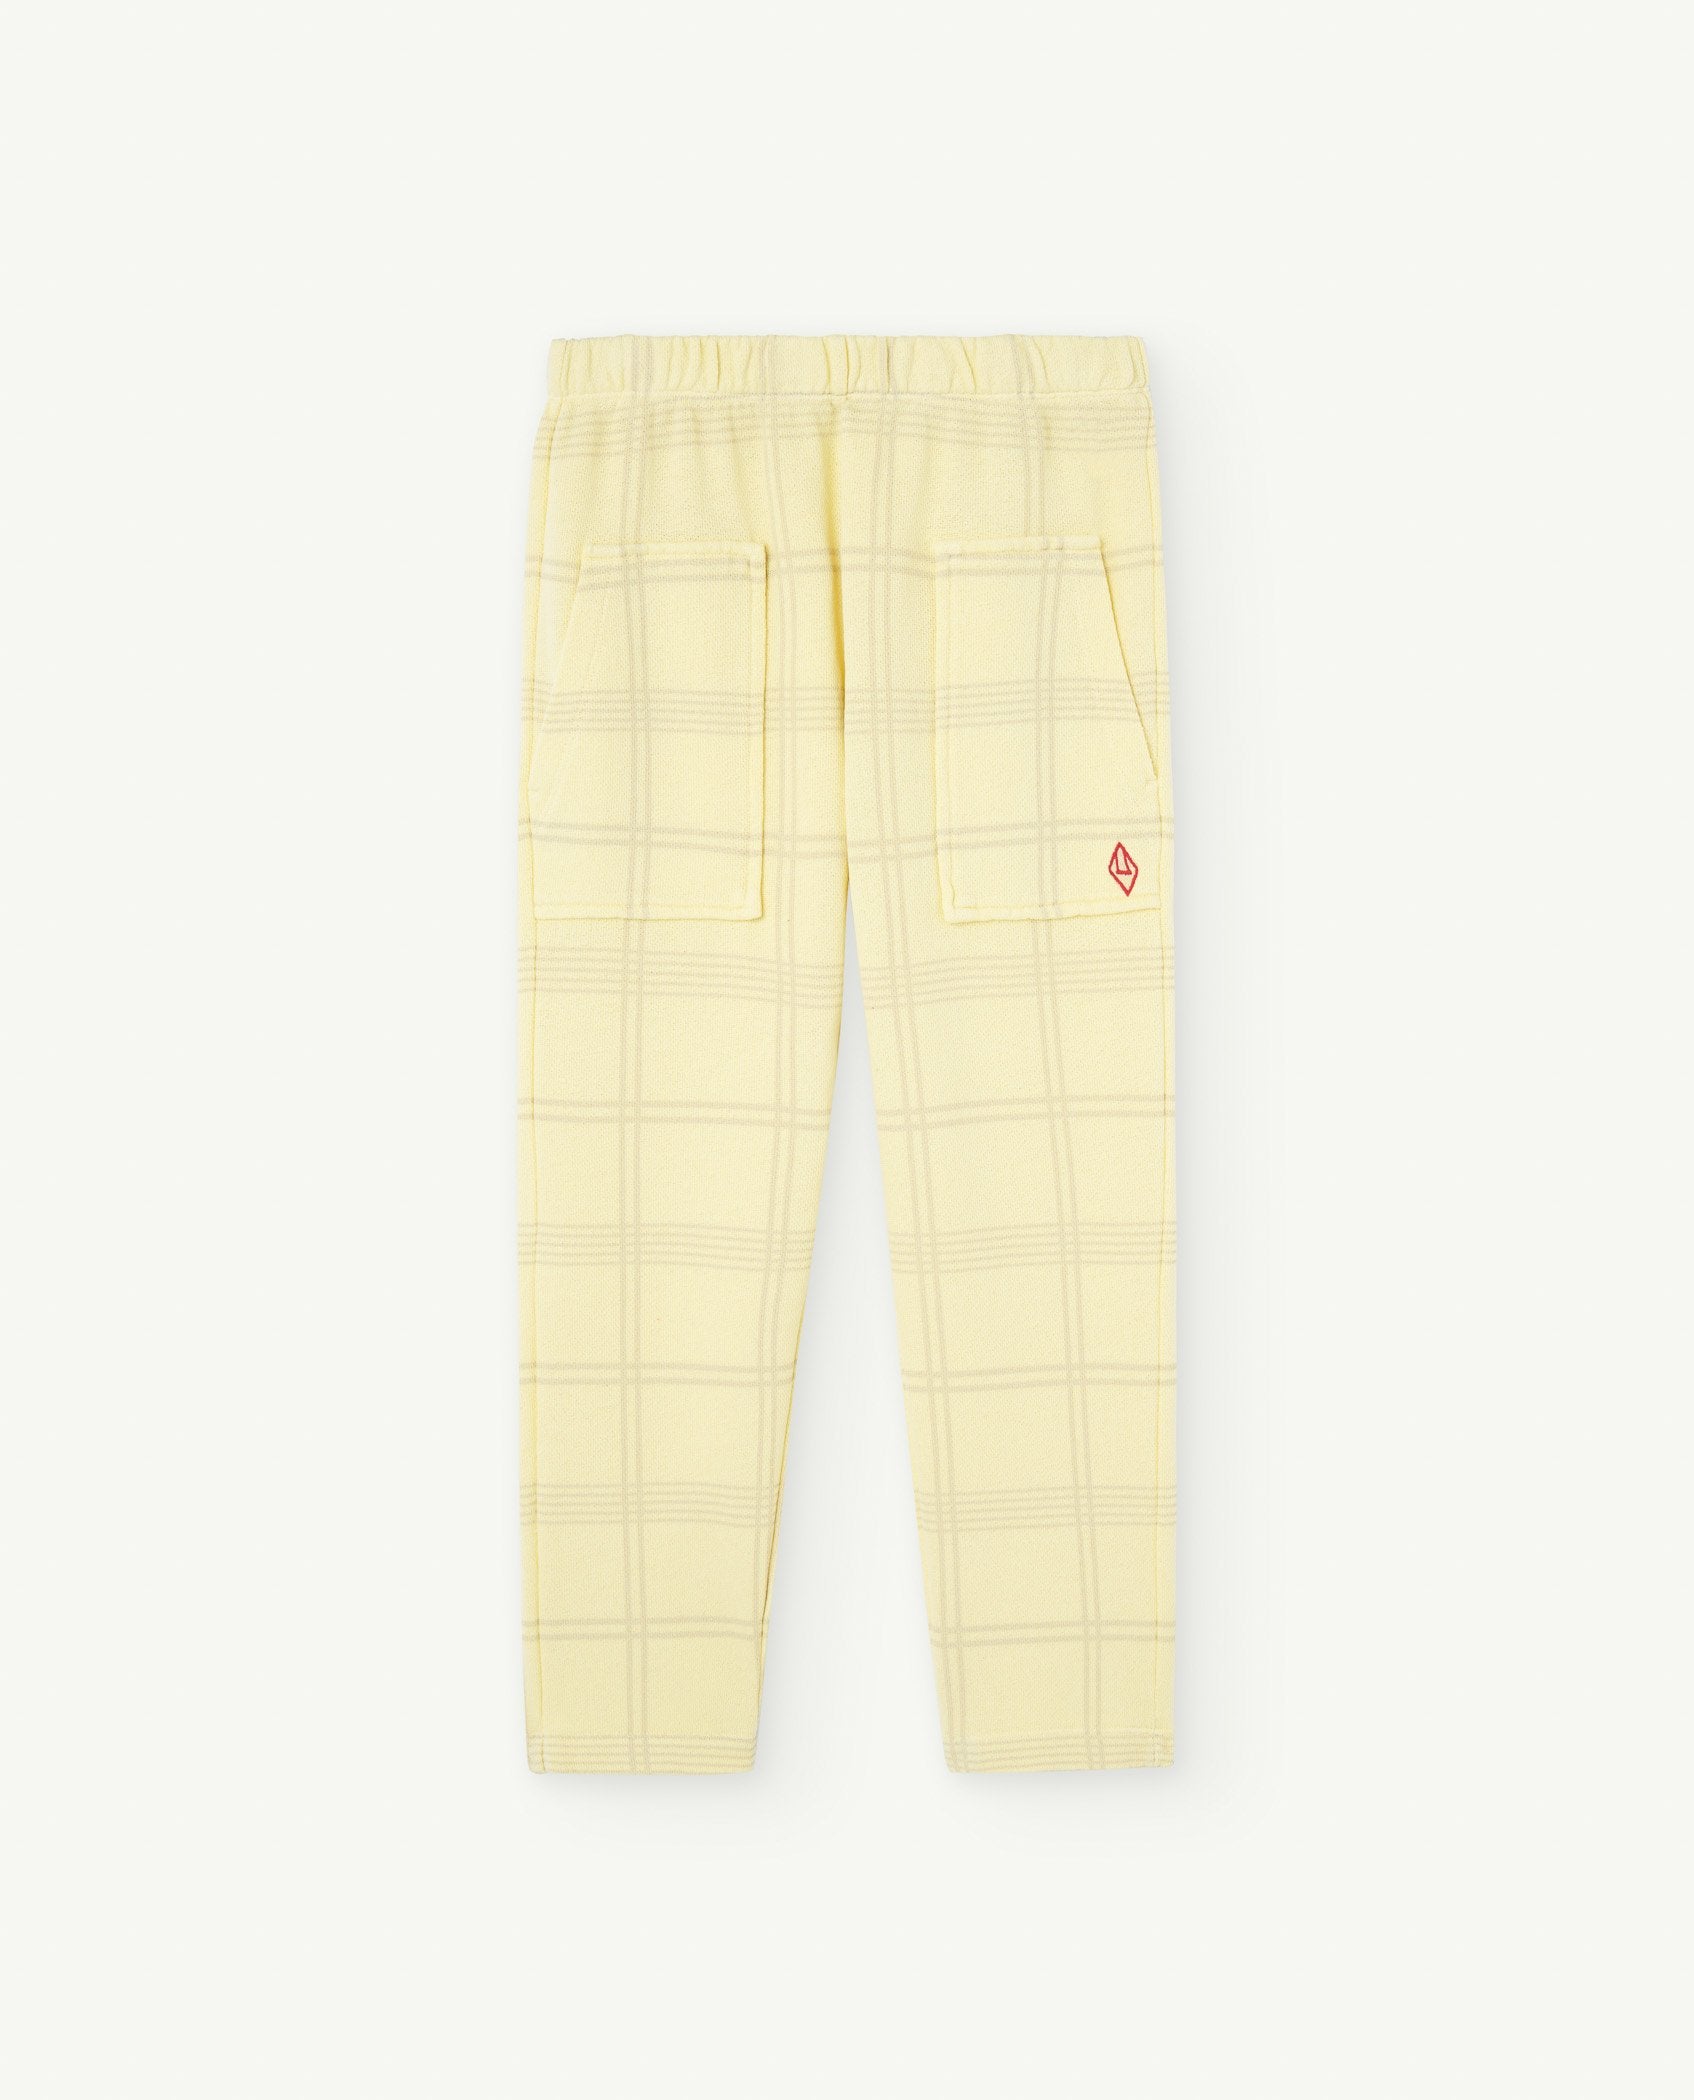 Soft Yellow Horse Sweatpants PRODUCT FRONT